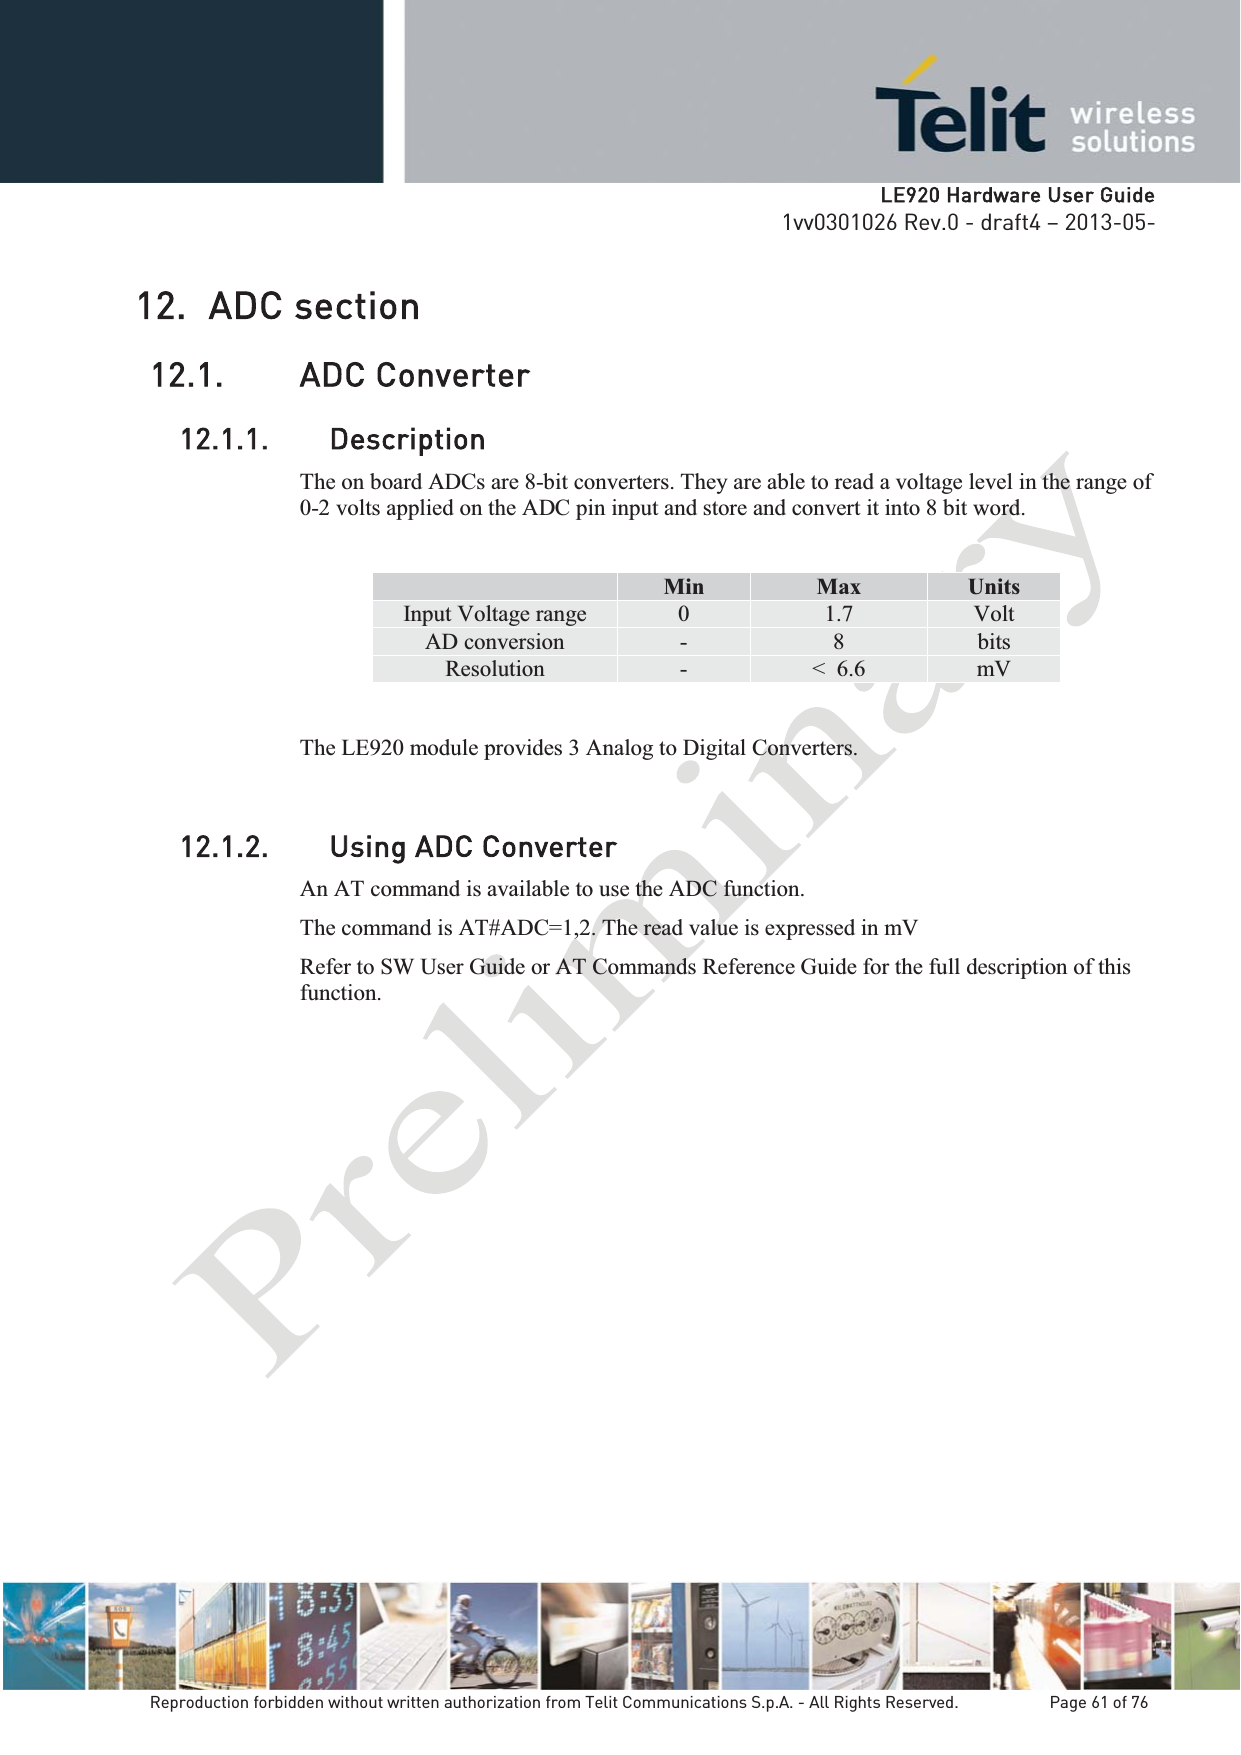   LLE920 Hardware User Guide1vv0301026 Rev.0 - draft4 – 2013-05-Reproduction forbidden without written authorization from Telit Communications S.p.A. - All Rights Reserved.    Page 61 of 76 12. ADC section 12.1. ADC Converter 12.1.1. Description The on board ADCs are 8-bit converters. They are able to read a voltage level in the range of 0-2 volts applied on the ADC pin input and store and convert it into 8 bit word.  Min  Max  Units Input Voltage range  0  1.7  Volt AD conversion  -  8  bits Resolution  -  &lt;  6.6  mV The LE920 module provides 3 Analog to Digital Converters.  12.1.2. Using ADC ConverterAn AT command is available to use the ADC function.  The command is AT#ADC=1,2. The read value is expressed in mV Refer to SW User Guide or AT Commands Reference Guide for the full description of this function.  